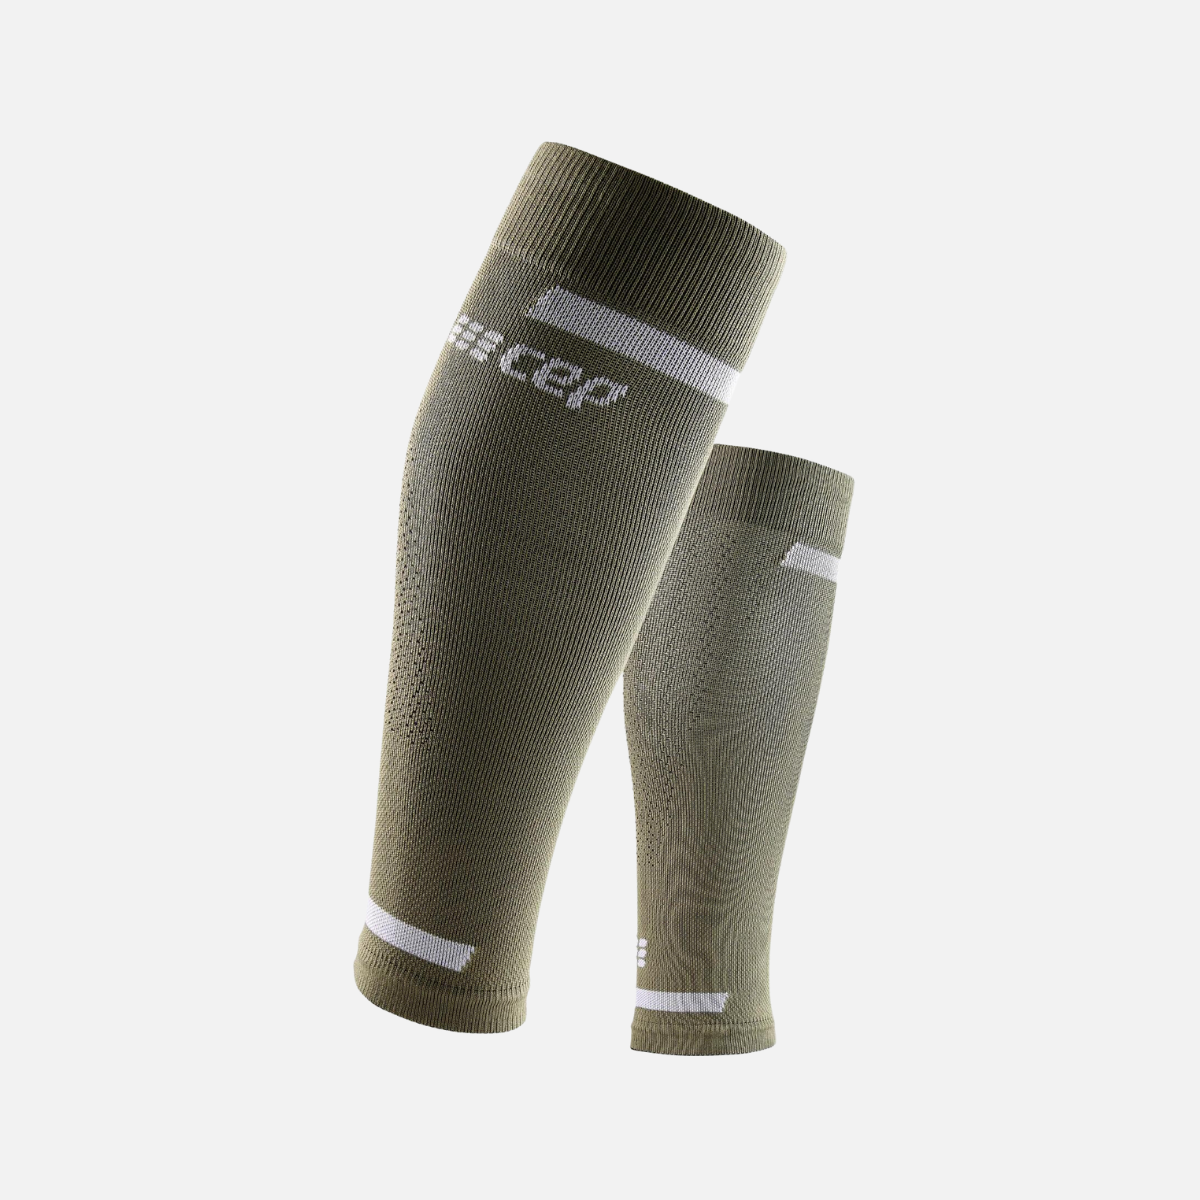 Cep The Run Compression 4.0 Men's Running Calf Sleeves -Olive